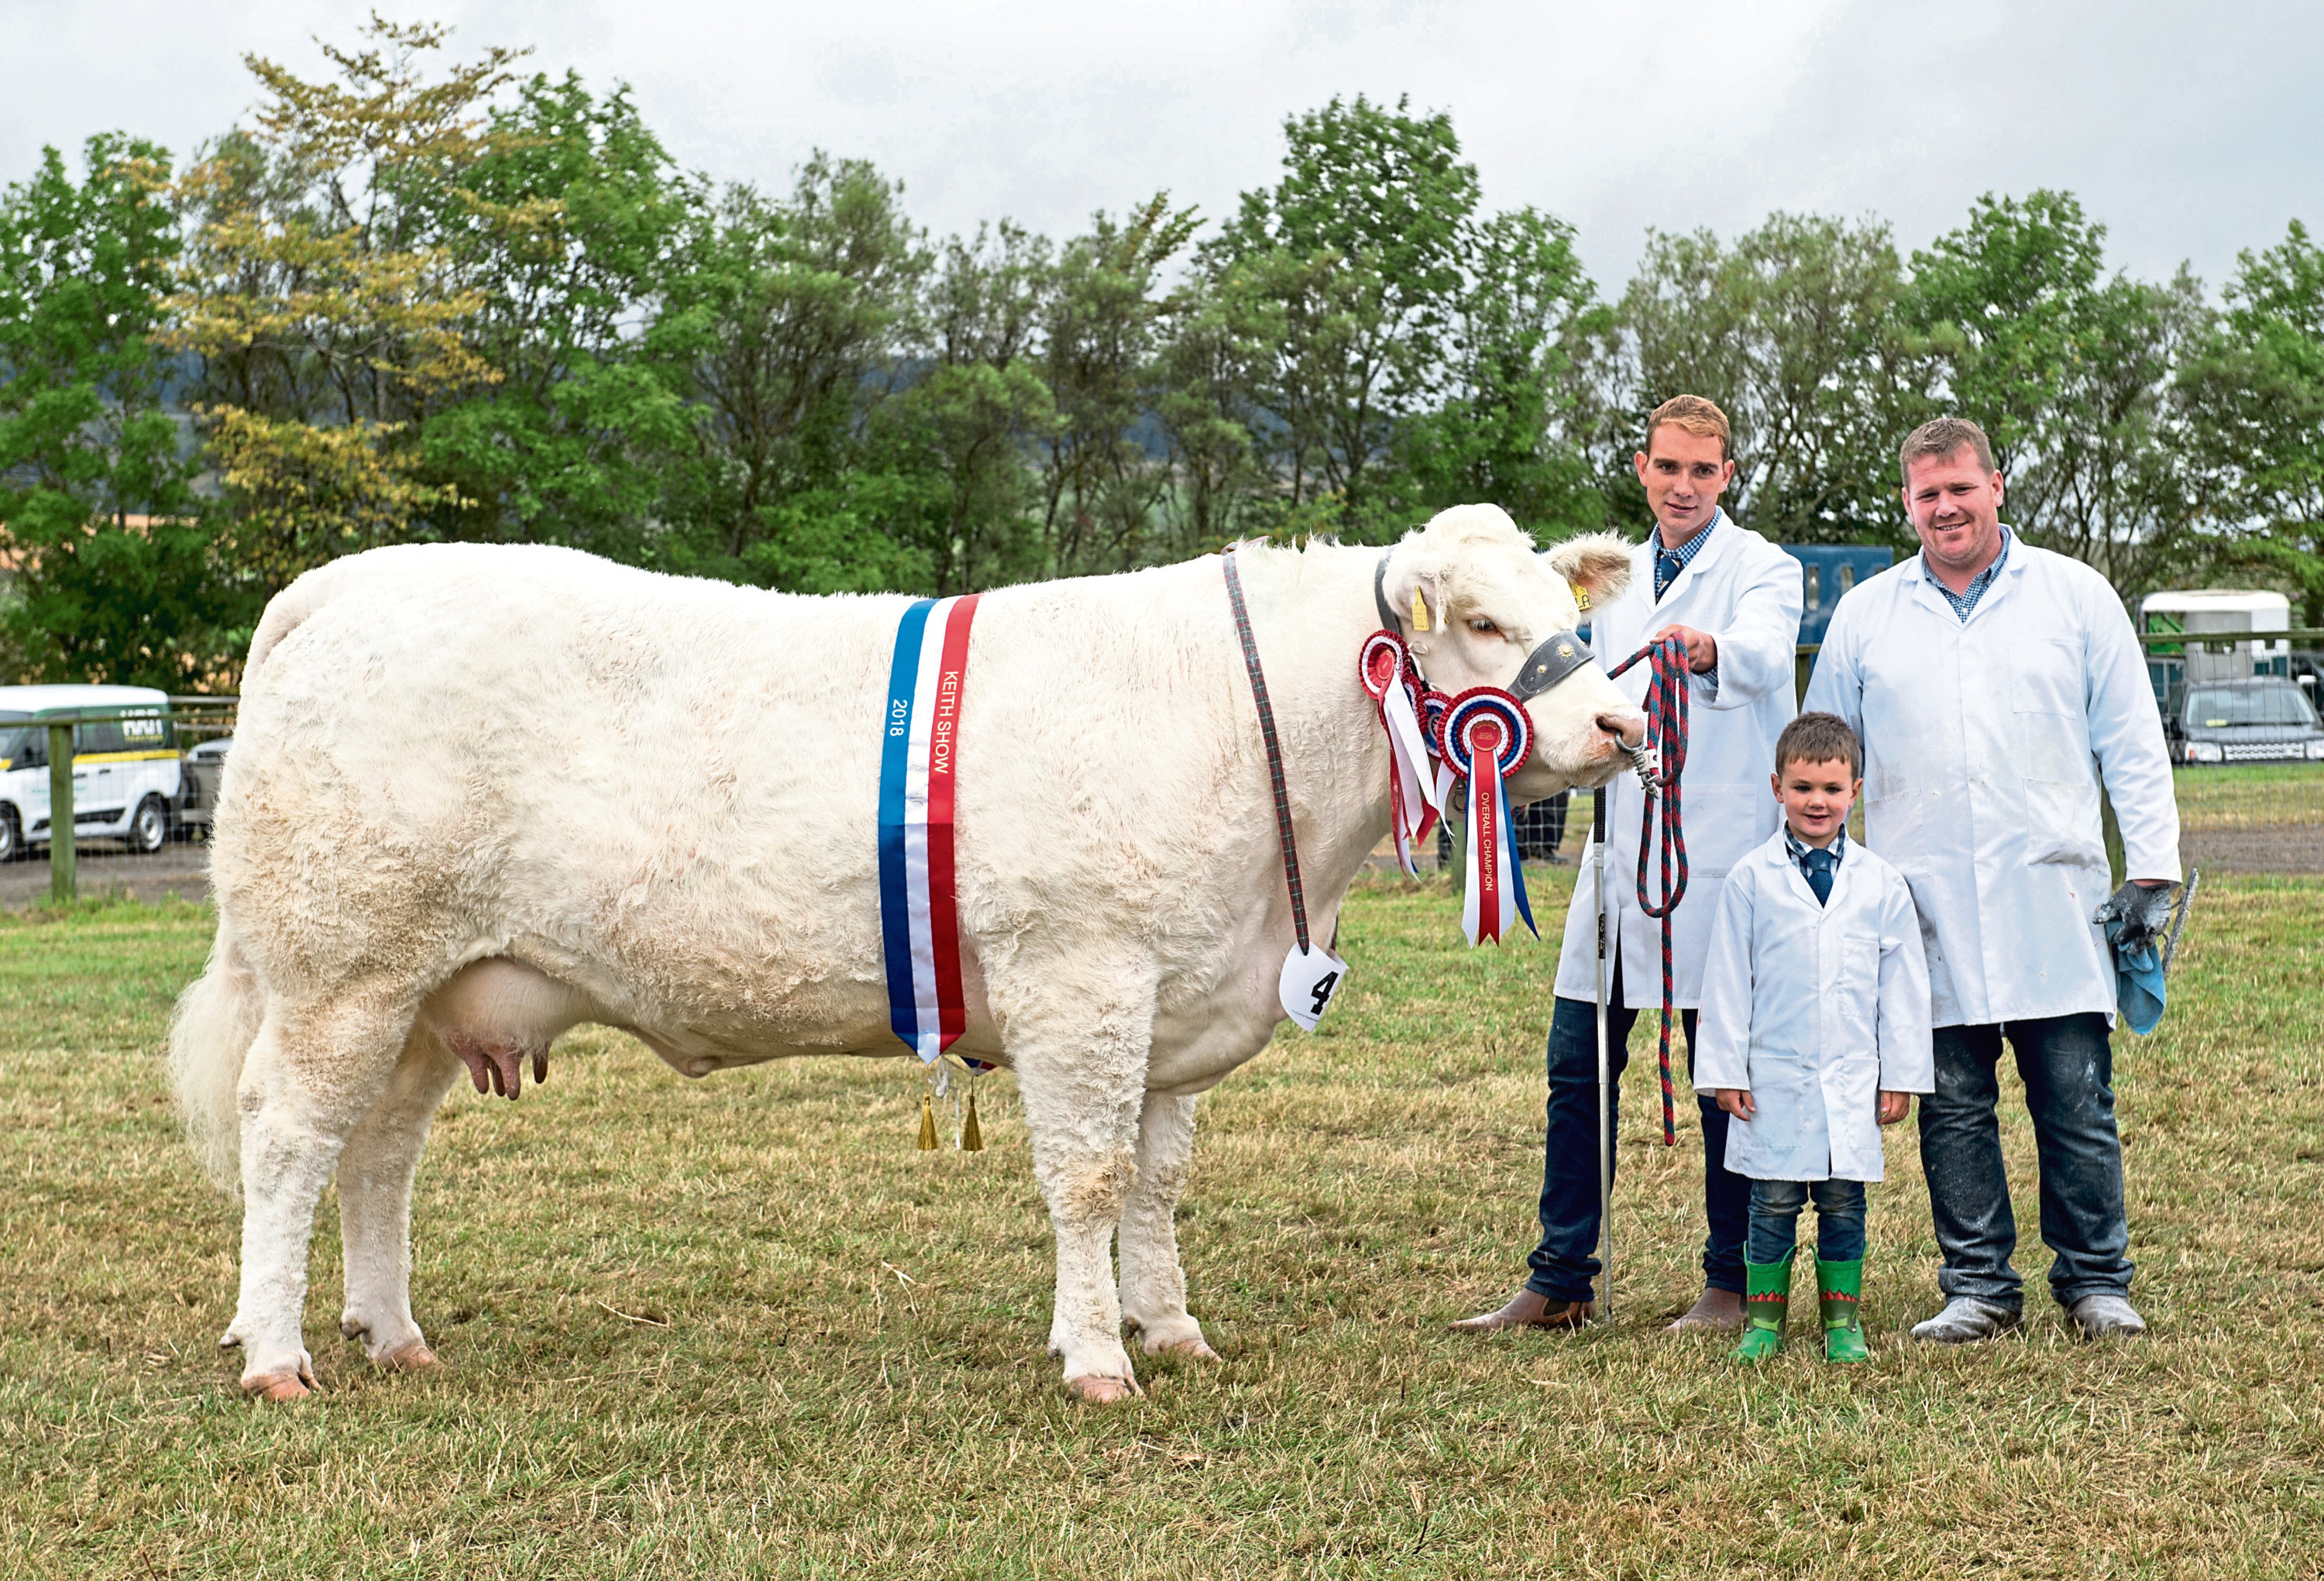 Sandy Hunter with the champion cow and Garry Patterson and his son Olly.